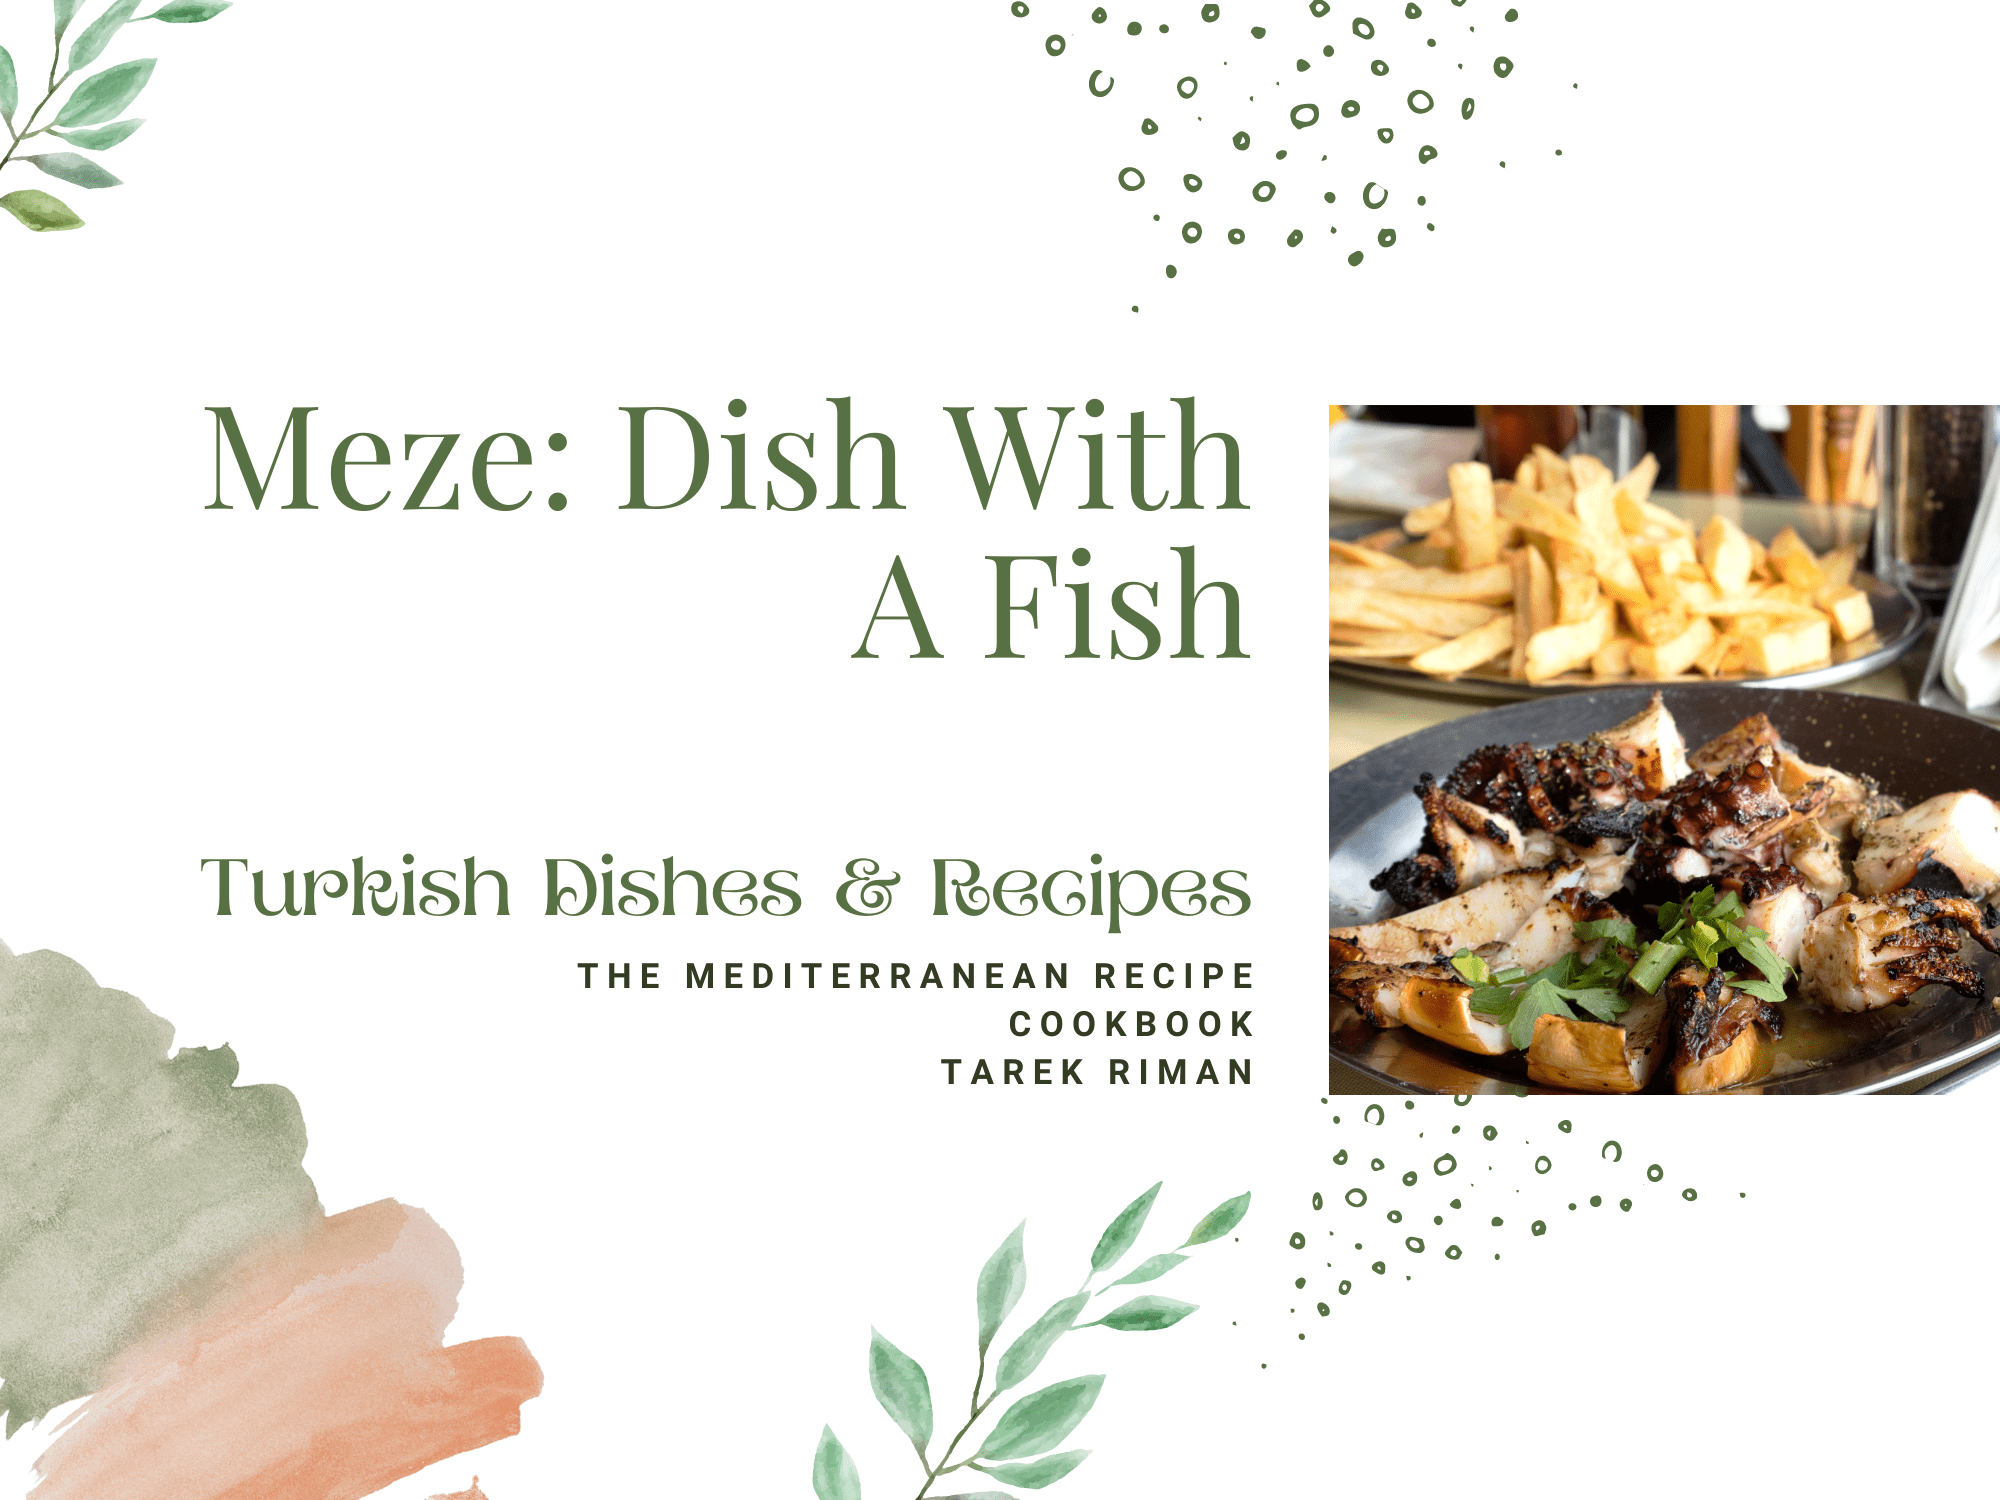 How to make Meze: Dish With A Fish